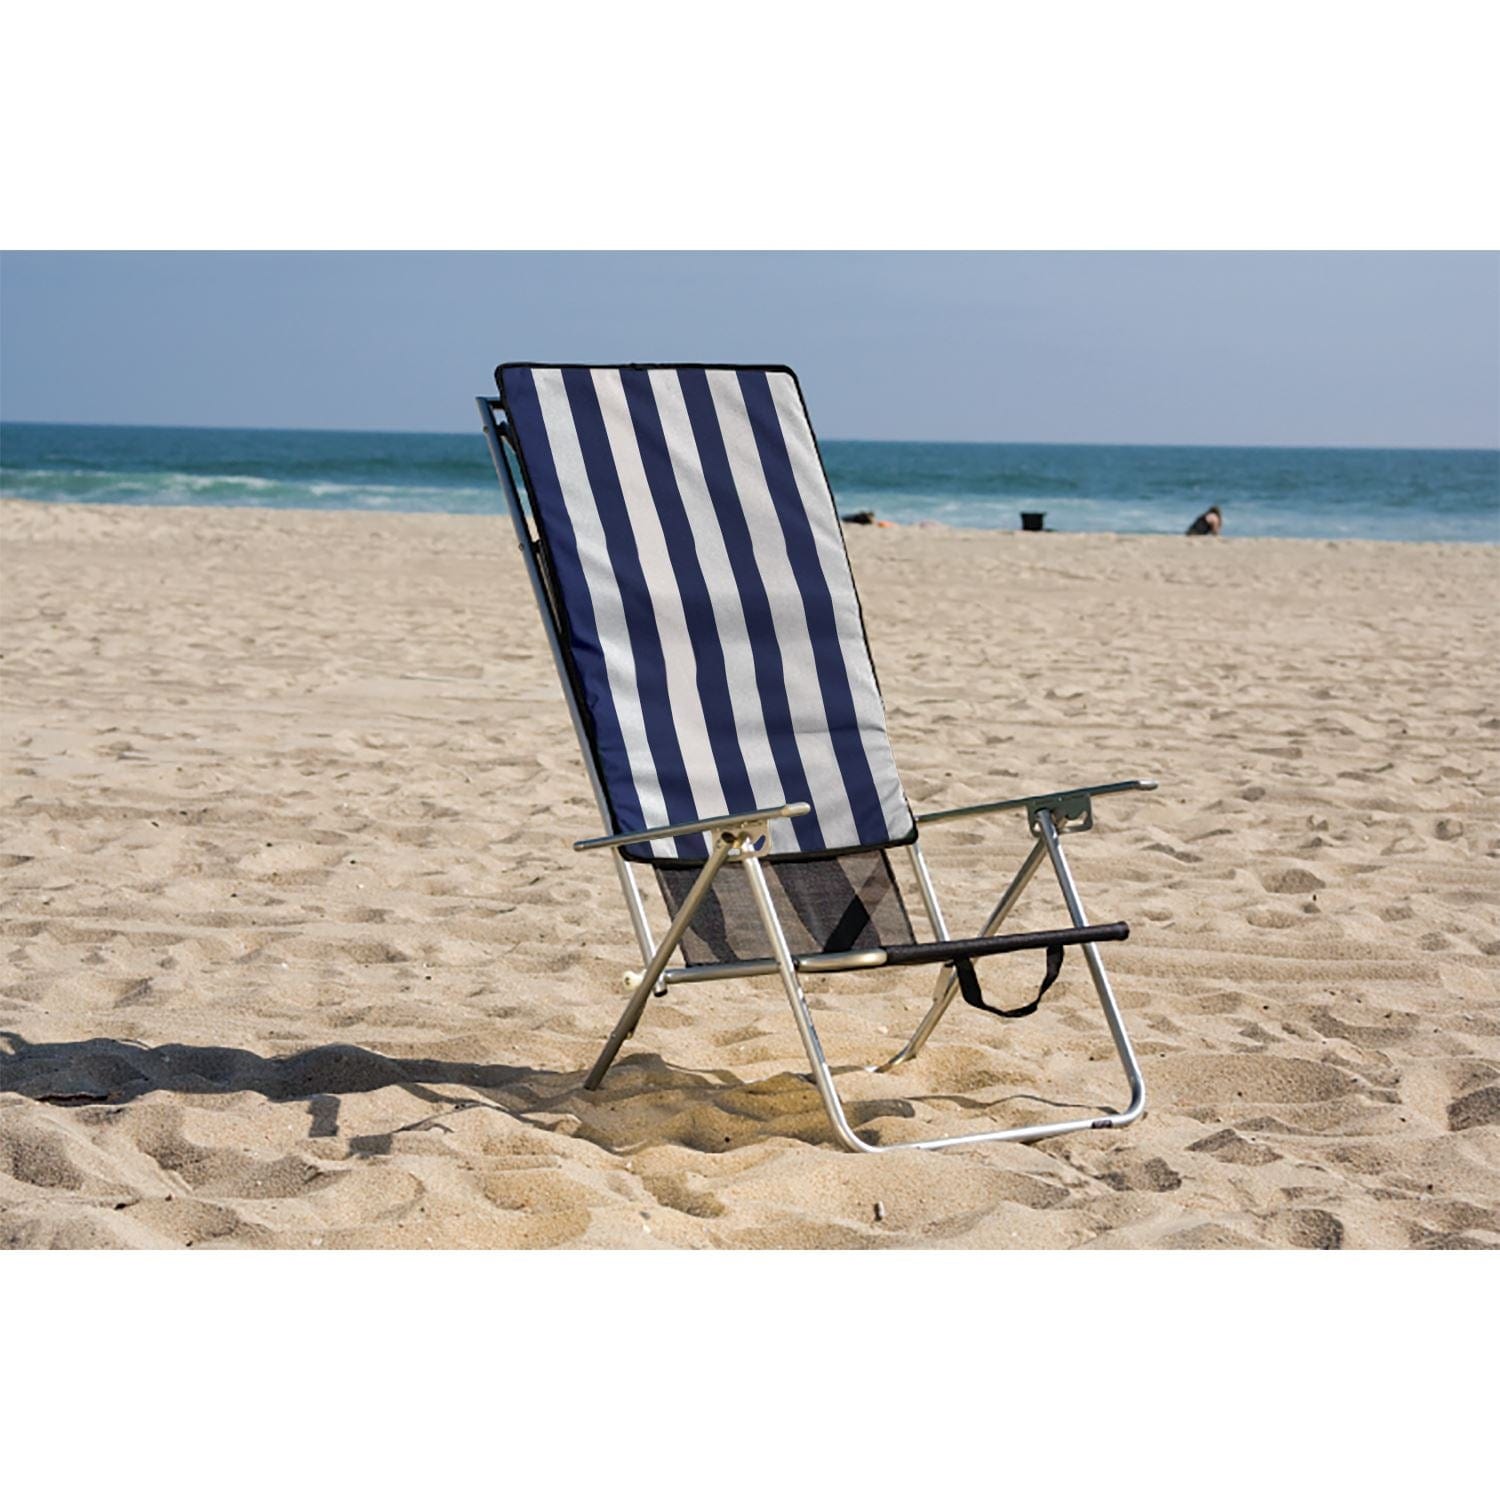 The Fulfiller Portable Chairs Quik Chair | Beach Recliner Shade Folding Chair - Navy/White 142038DS